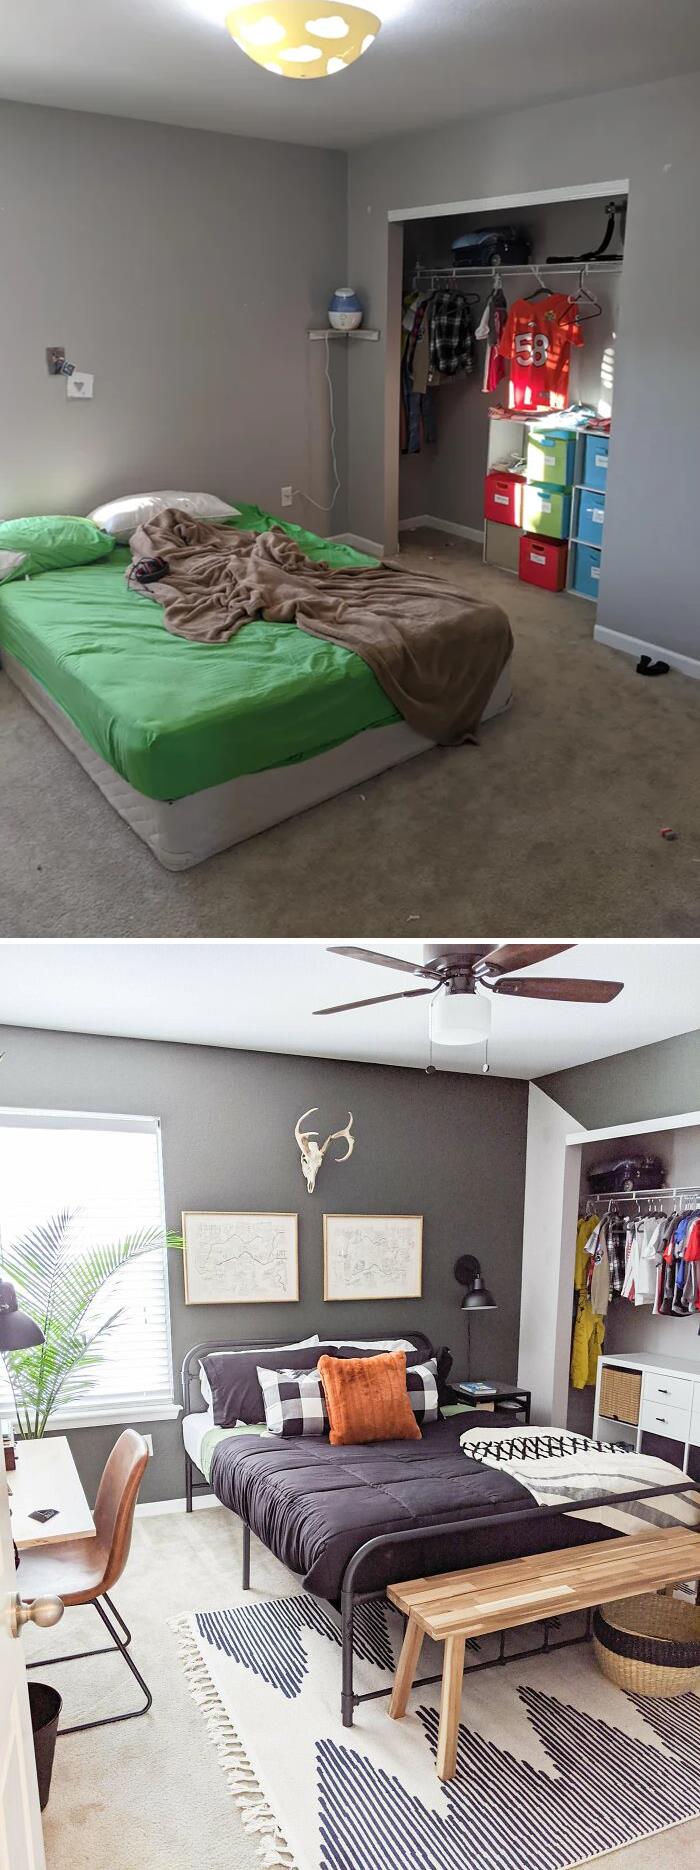 Bedroom Makeover For My 9 Year Old Son. Denver, Co. After vs. Before